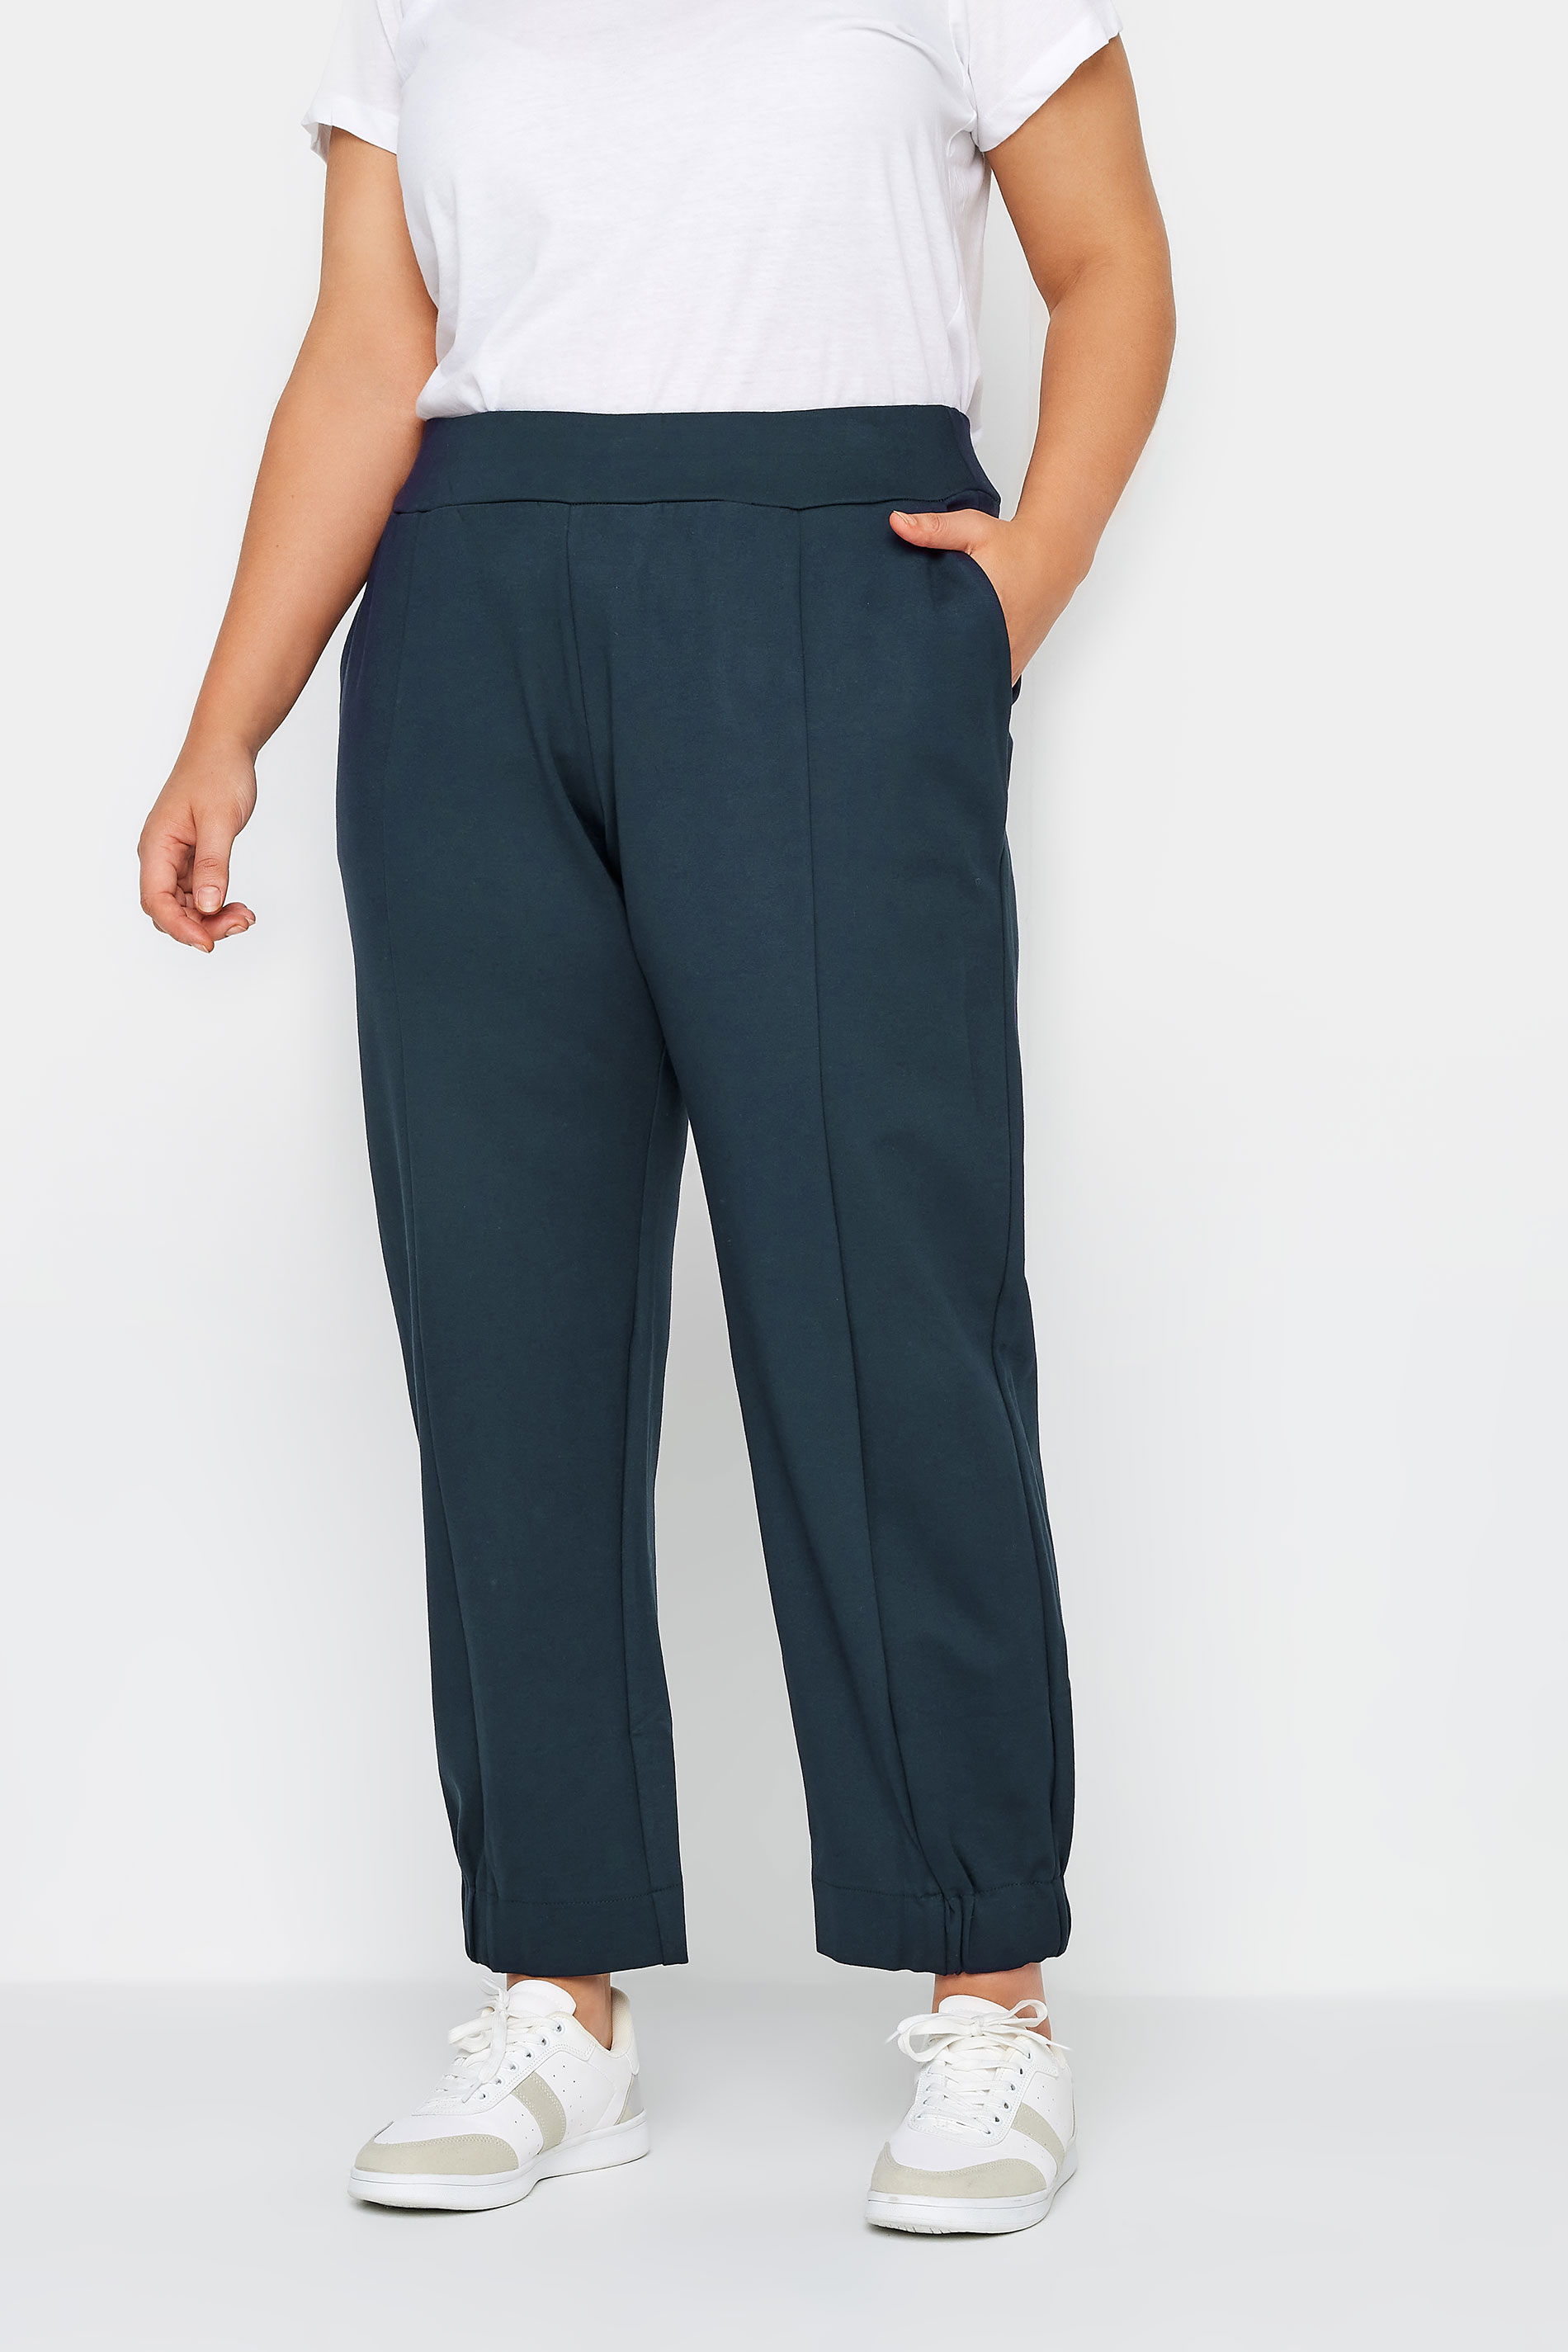 City Chic Navy Blue Ponte Trousers 1